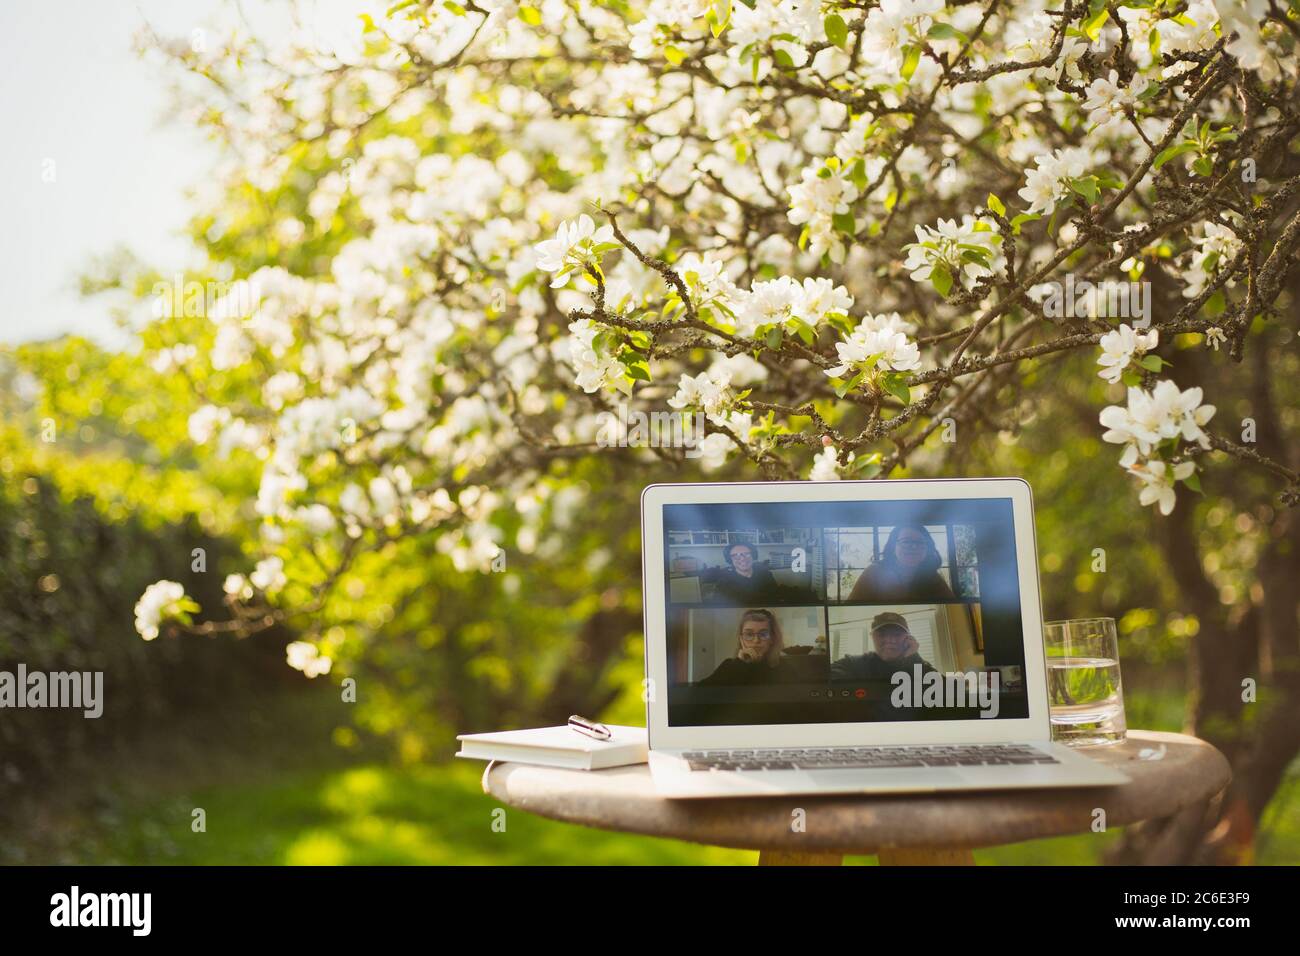 Friends video chatting on laptop screen in sunny garden Stock Photo